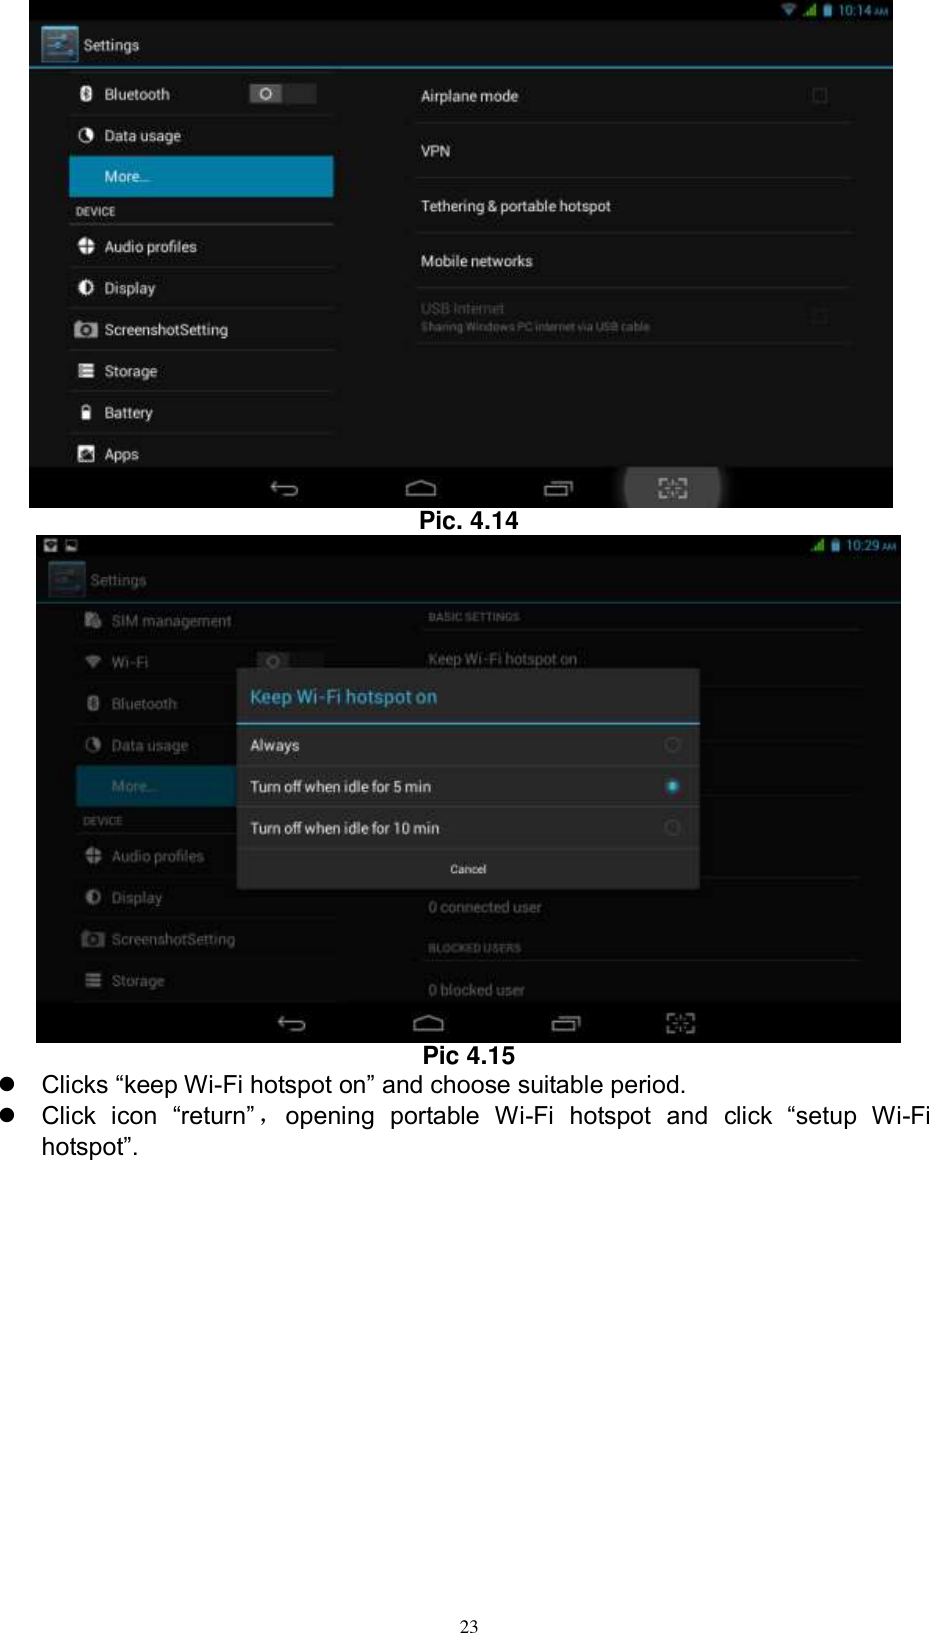      23  Pic. 4.14  Pic 4.15  Clicks “keep Wi-Fi hotspot on” and choose suitable period.    Click  icon  “return” ，opening  portable  Wi-Fi  hotspot  and  click  “setup  Wi-Fi hotspot”.   